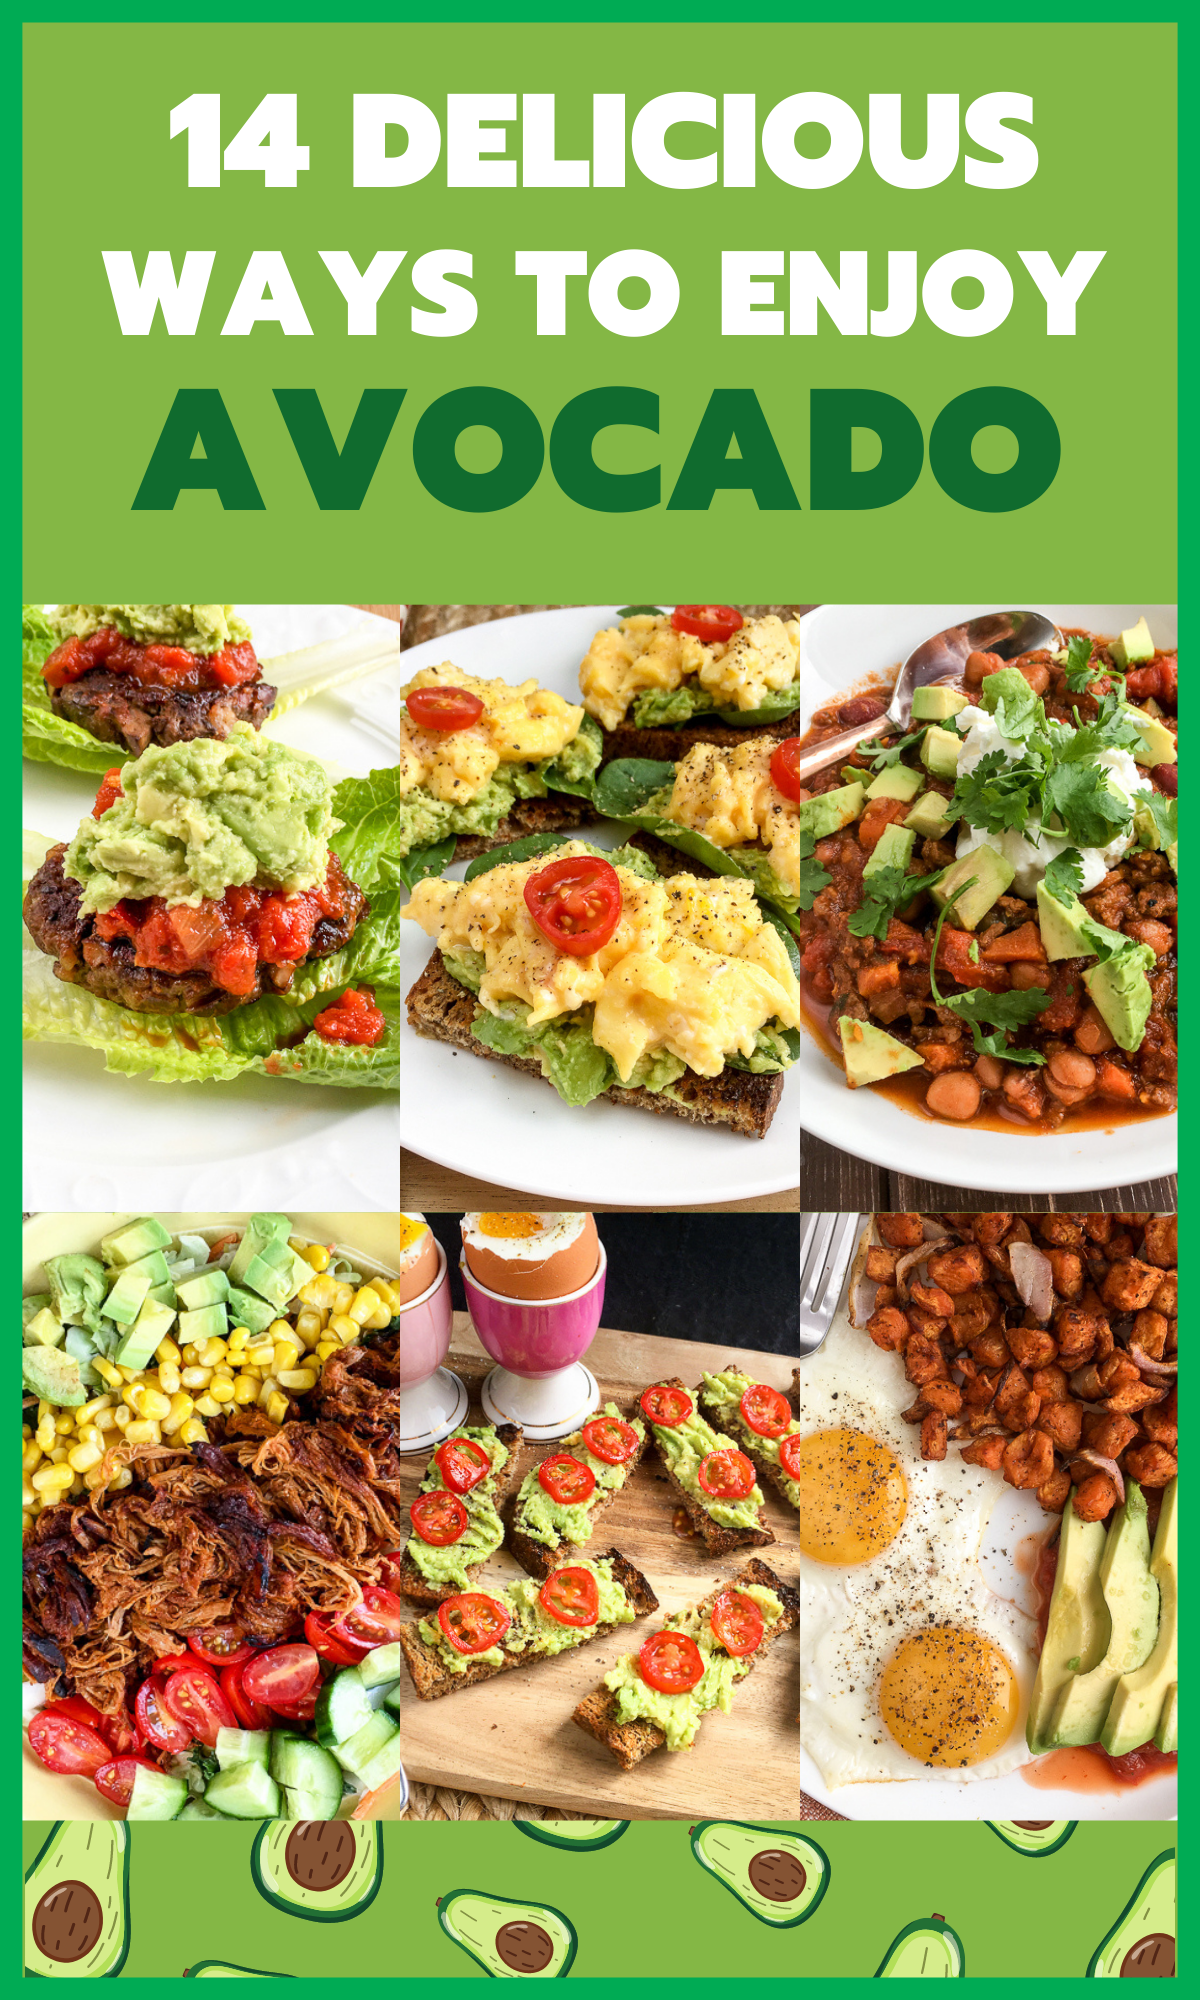 Pin image showing different ideas with avocado